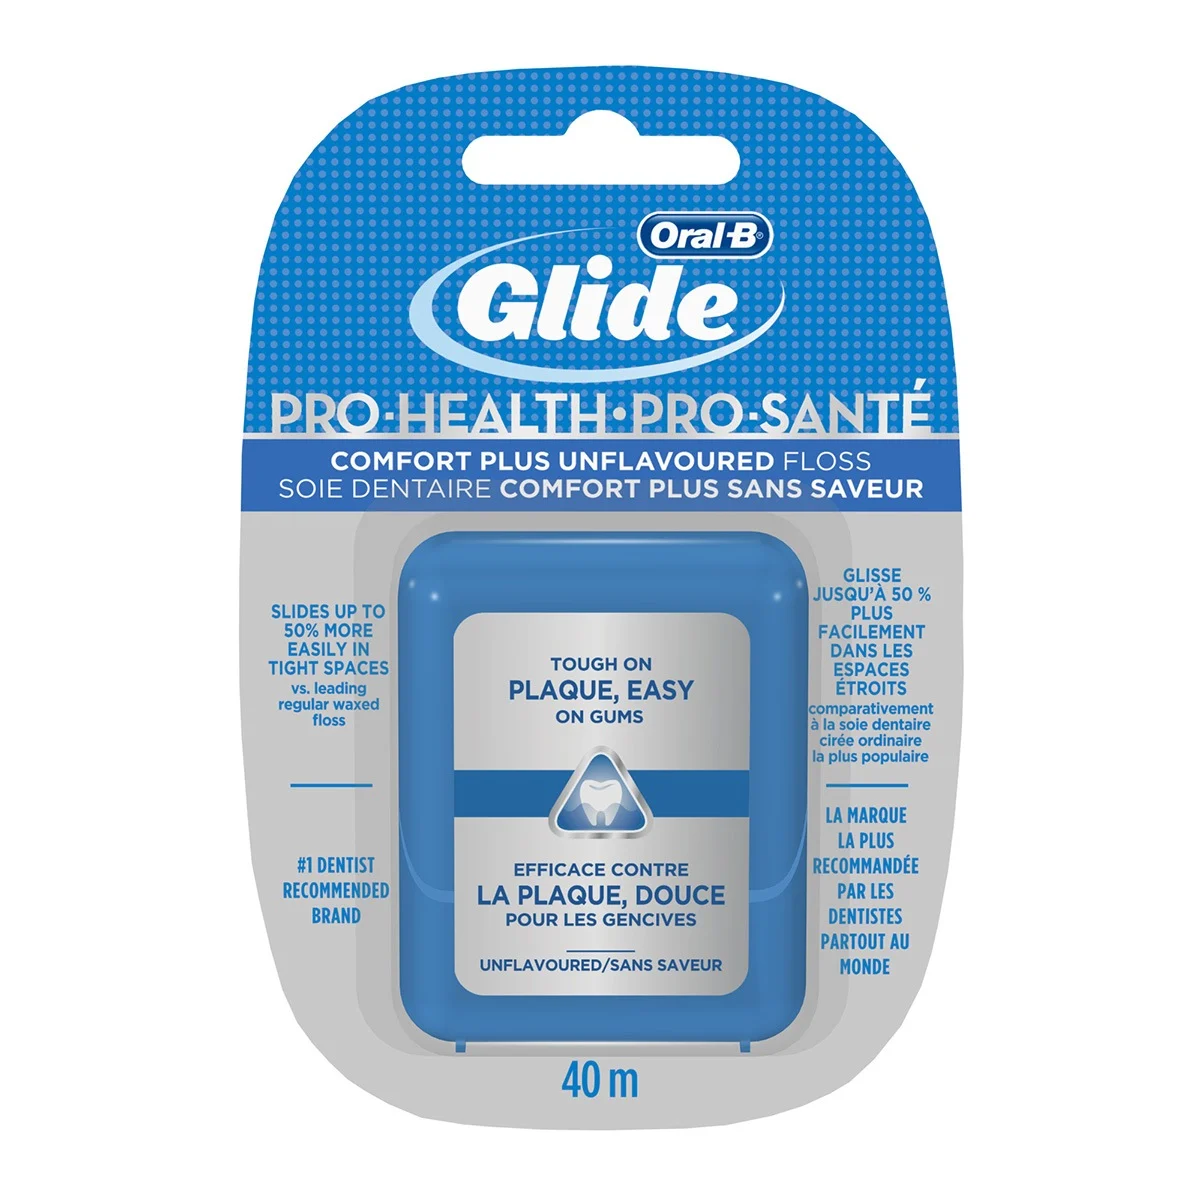 Oral-B Glide Pro-Health Comfort Plus Floss undefined